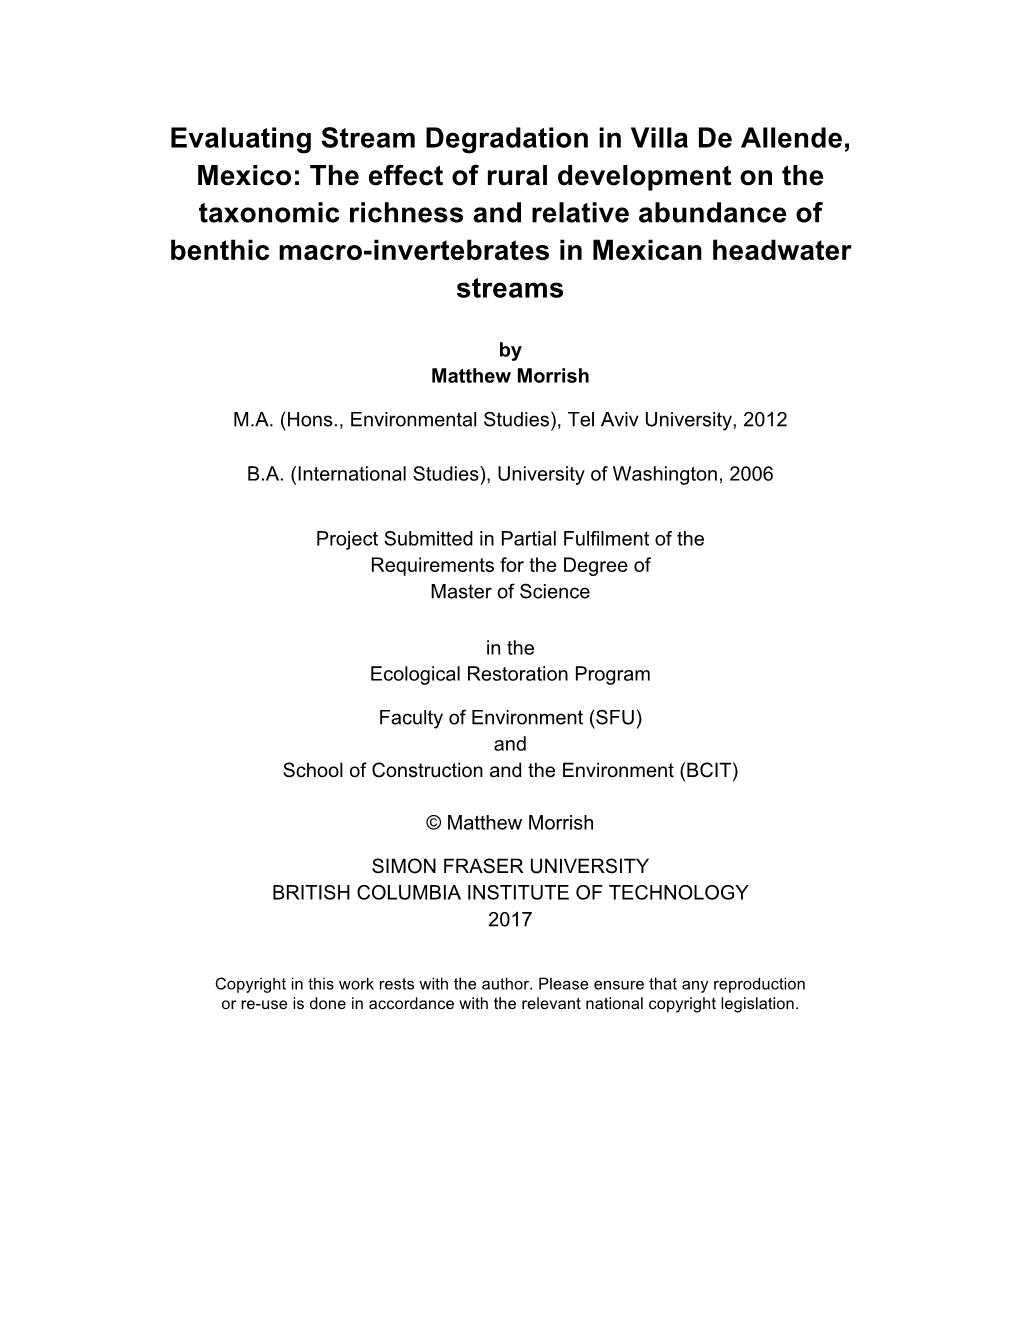 The Effect of Rural Development on the Taxonomic Richness and Relative Abundance of Benthic Macro-Invertebrates in Mexican Headwater Streams